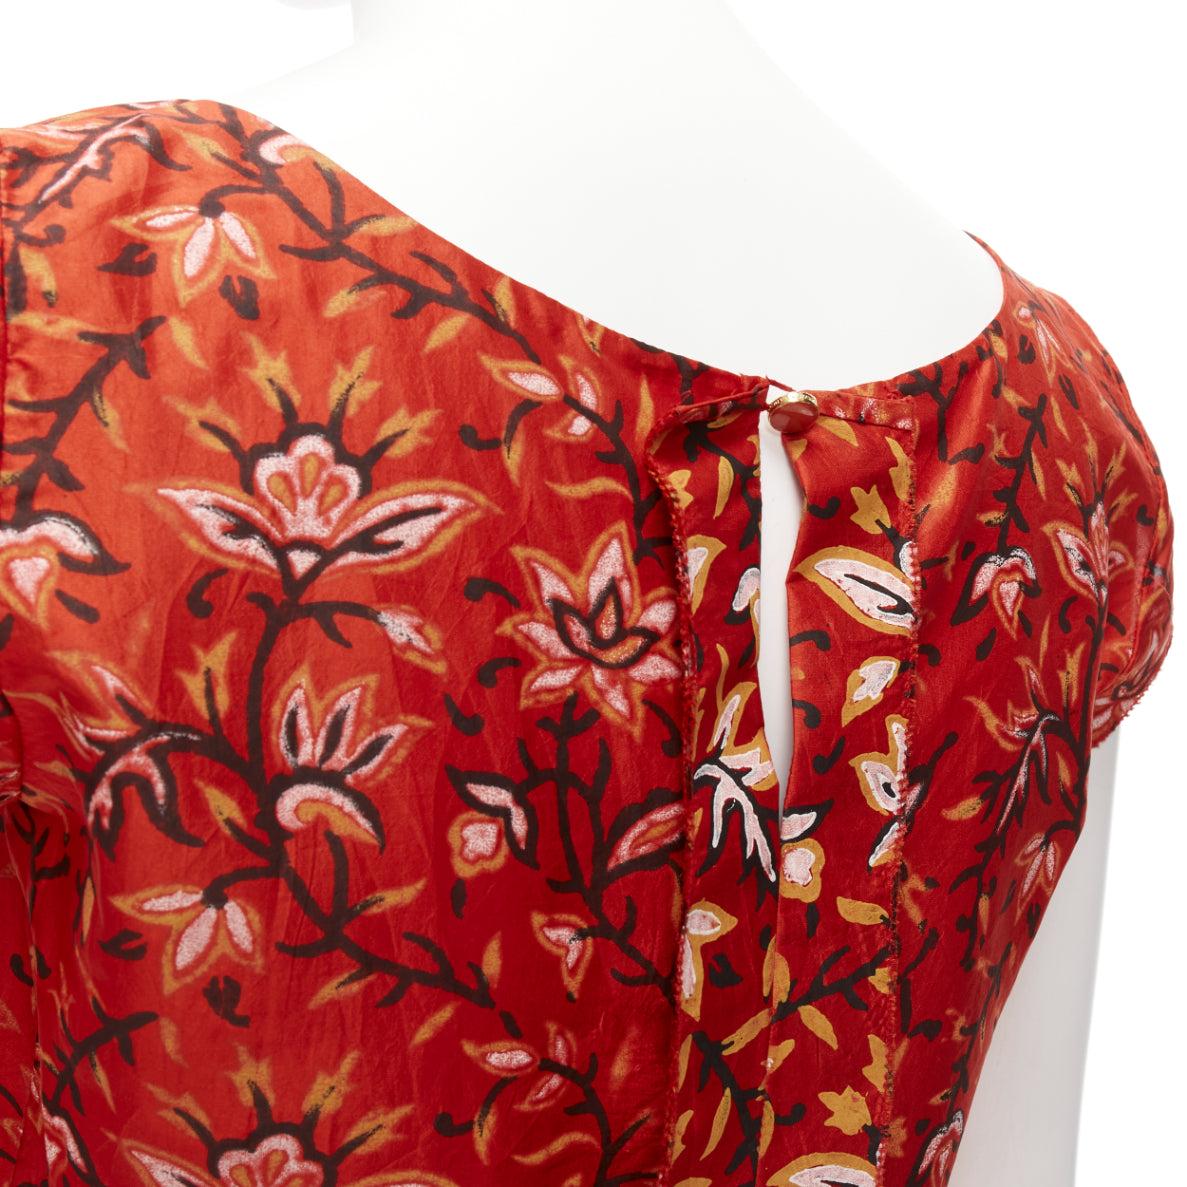 OSCAR DE LA RENTA 2010 100% silk red floral cap sleeve keyhole back top US0 XS
Reference: LNKO/A02309
Brand: Oscar de la Renta
Designer: Oscar De La Renta
Collection: FW 2010
Material: Silk
Color: Red
Pattern: Floral
Closure: Keyhole Button
Lining: